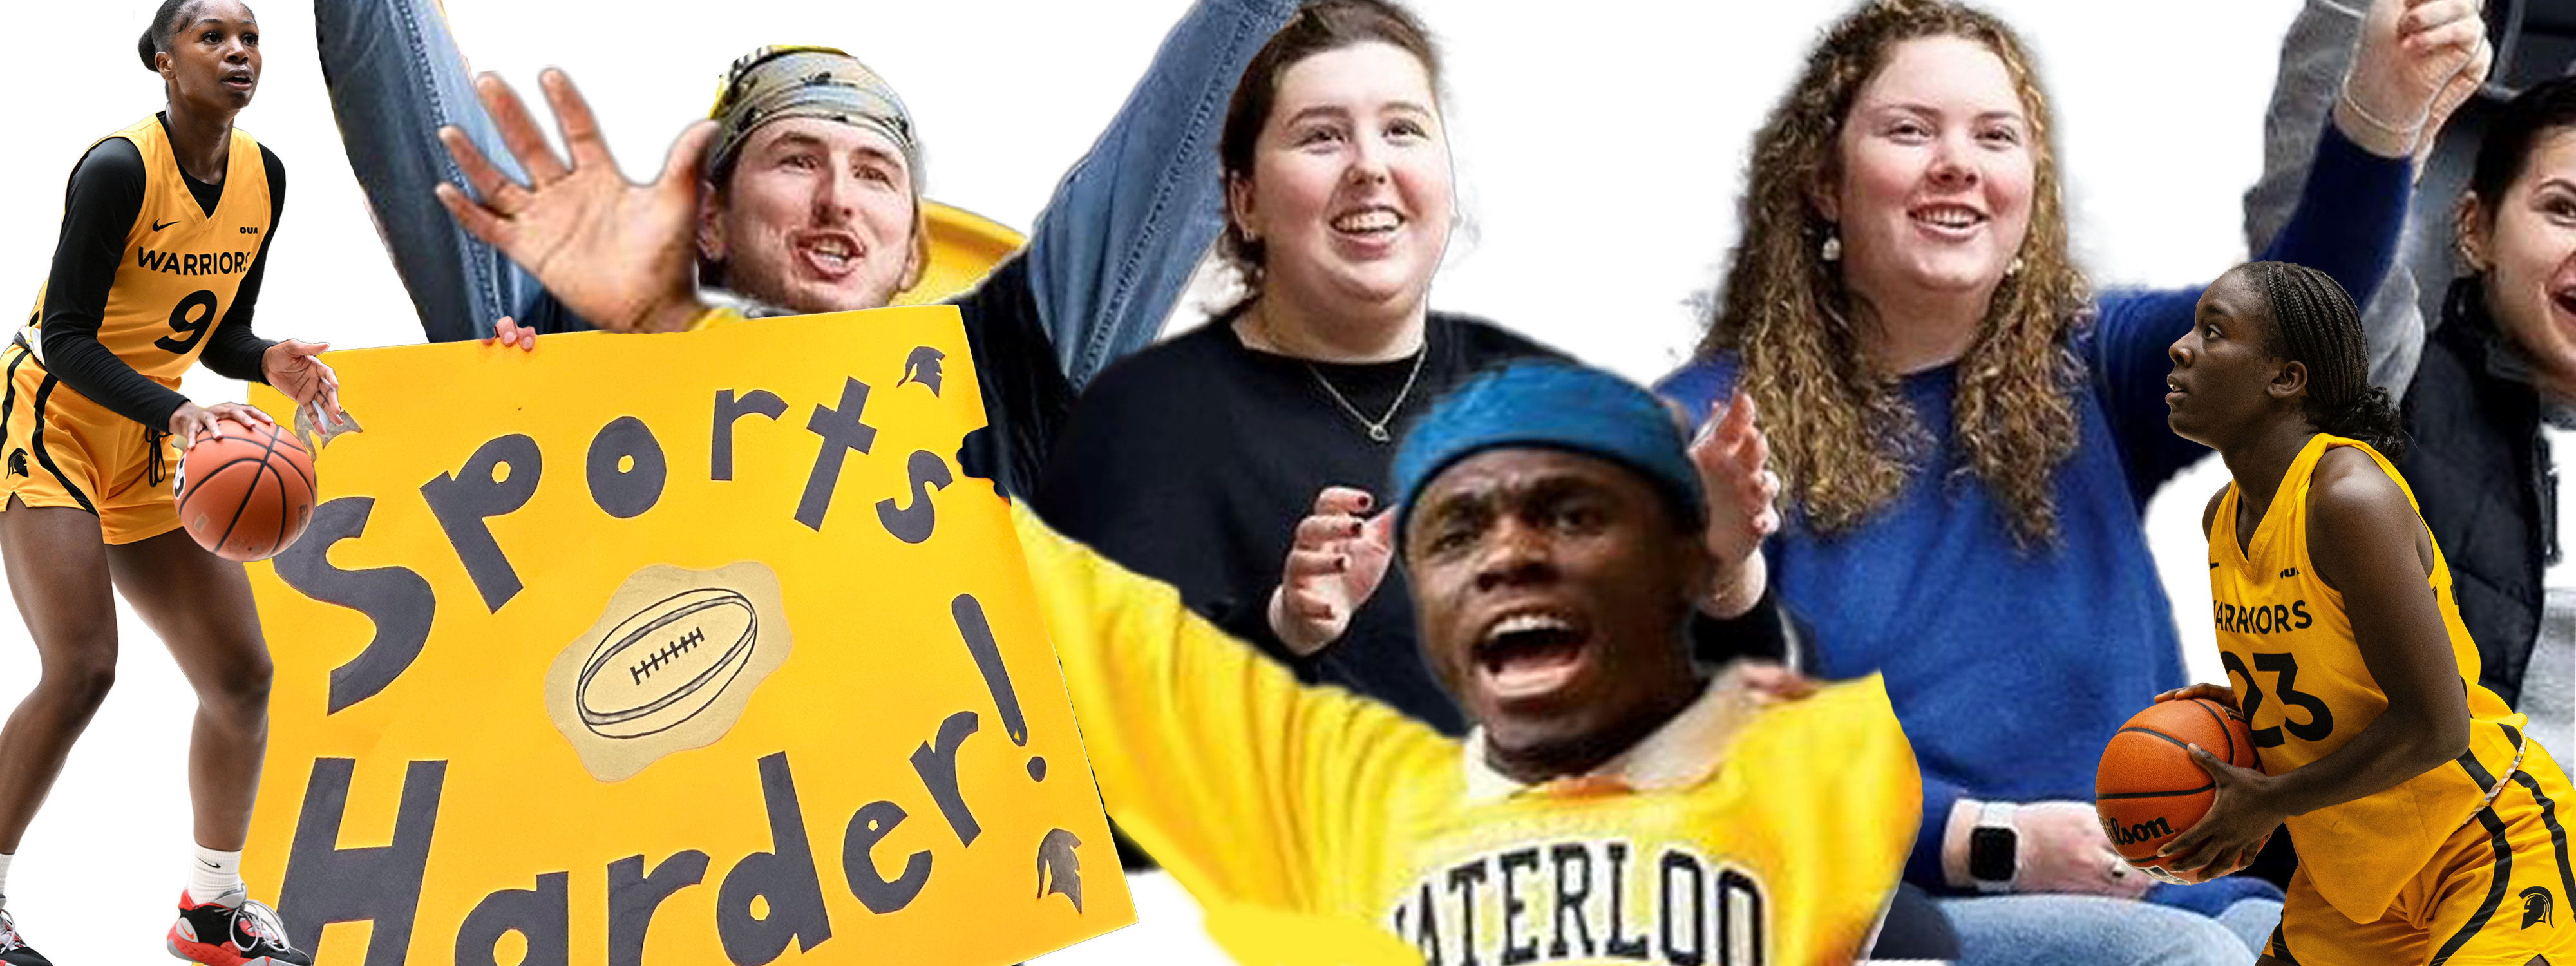 a collage of students cheering on basketball players